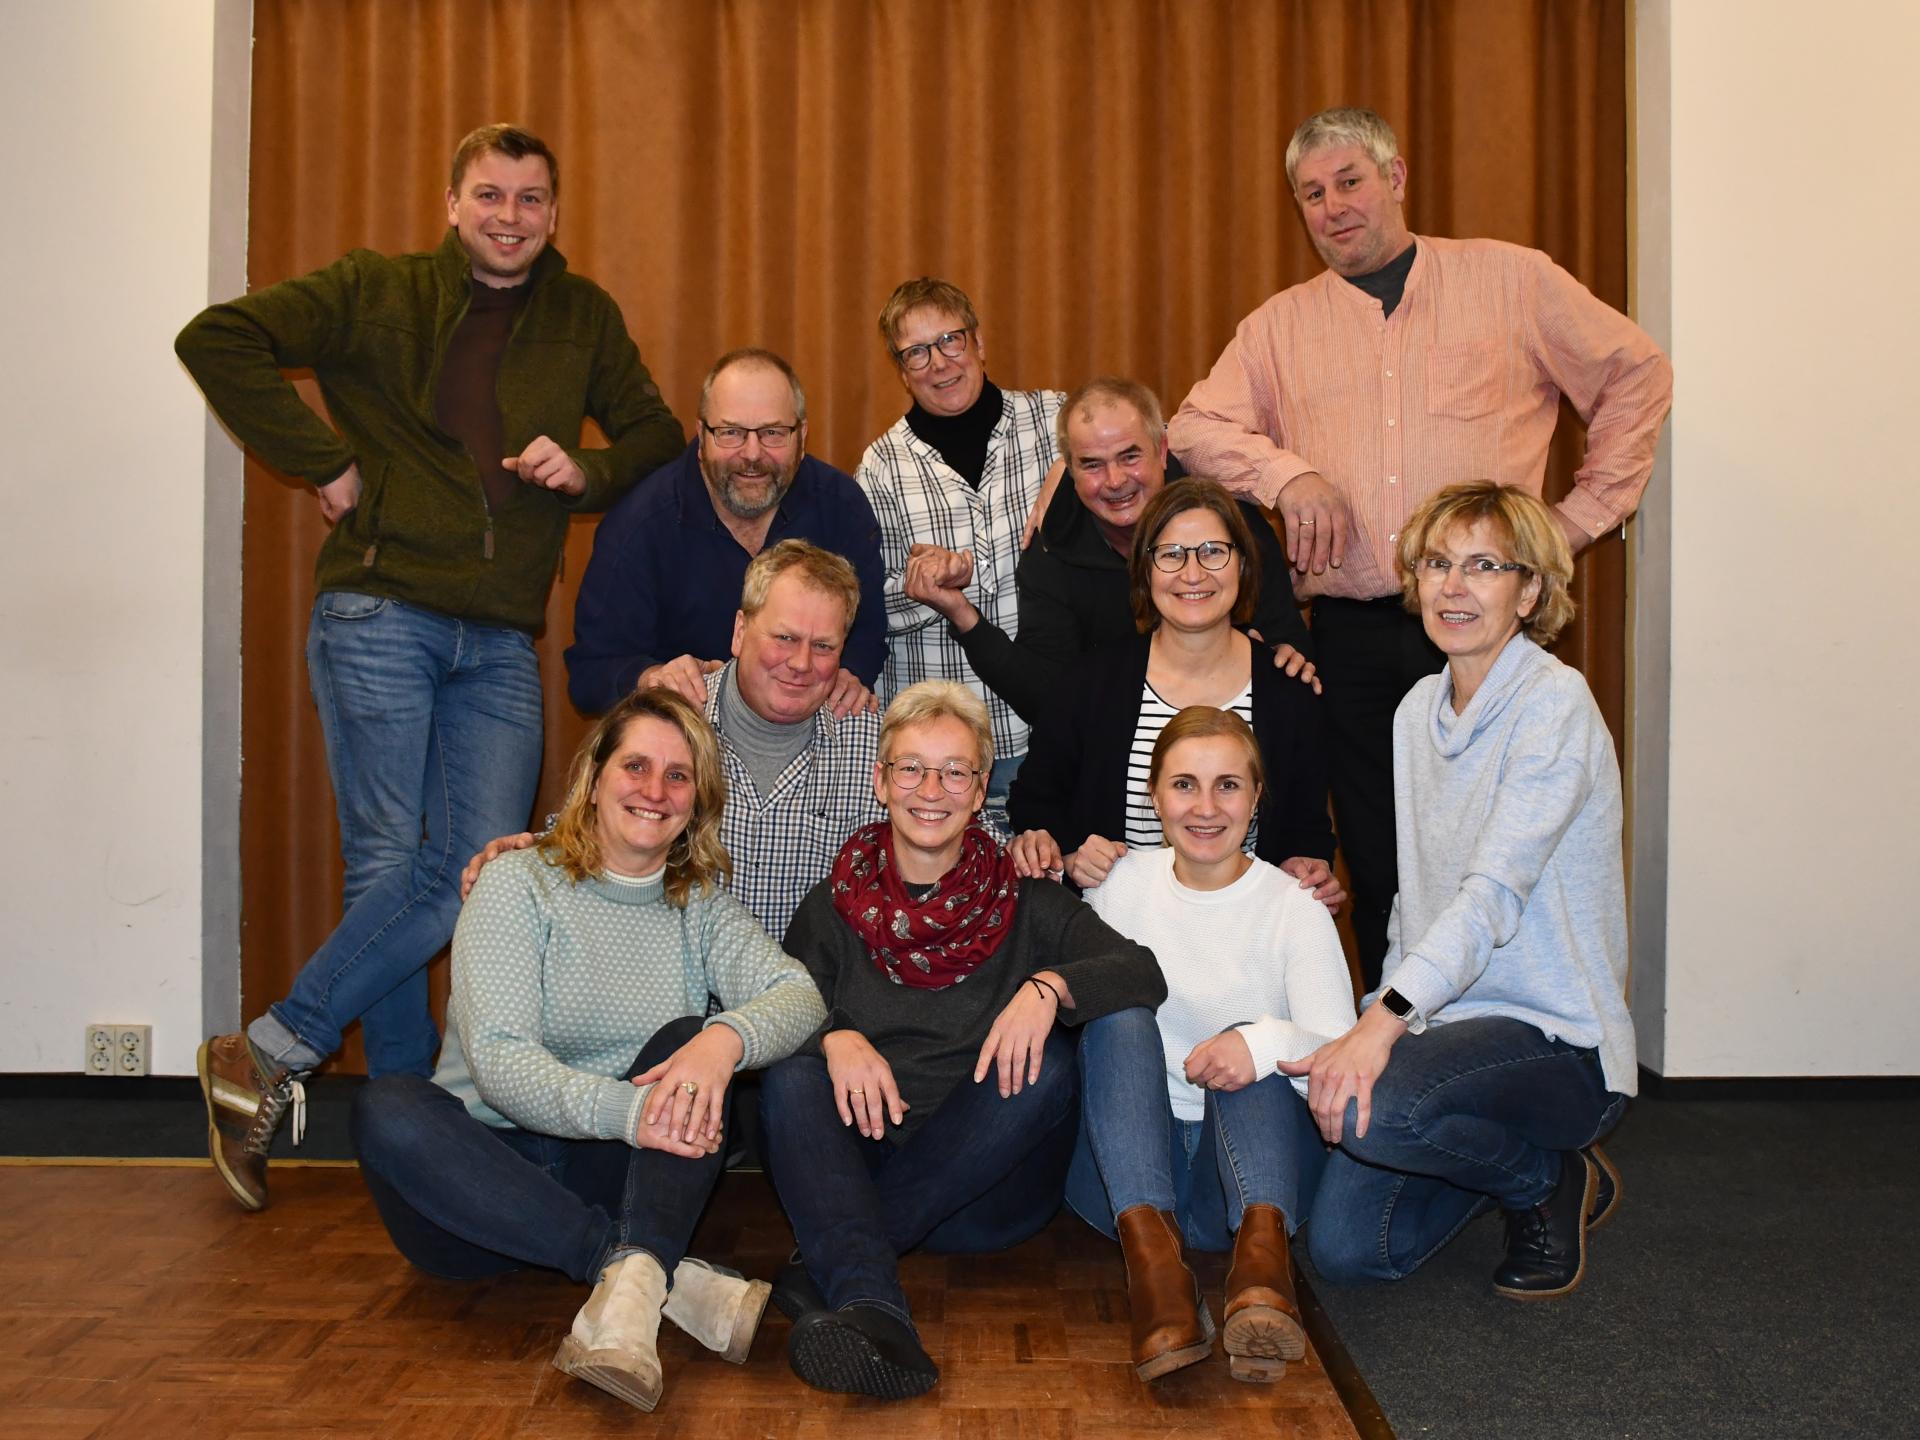 Theatergruppe "Das andere Links"